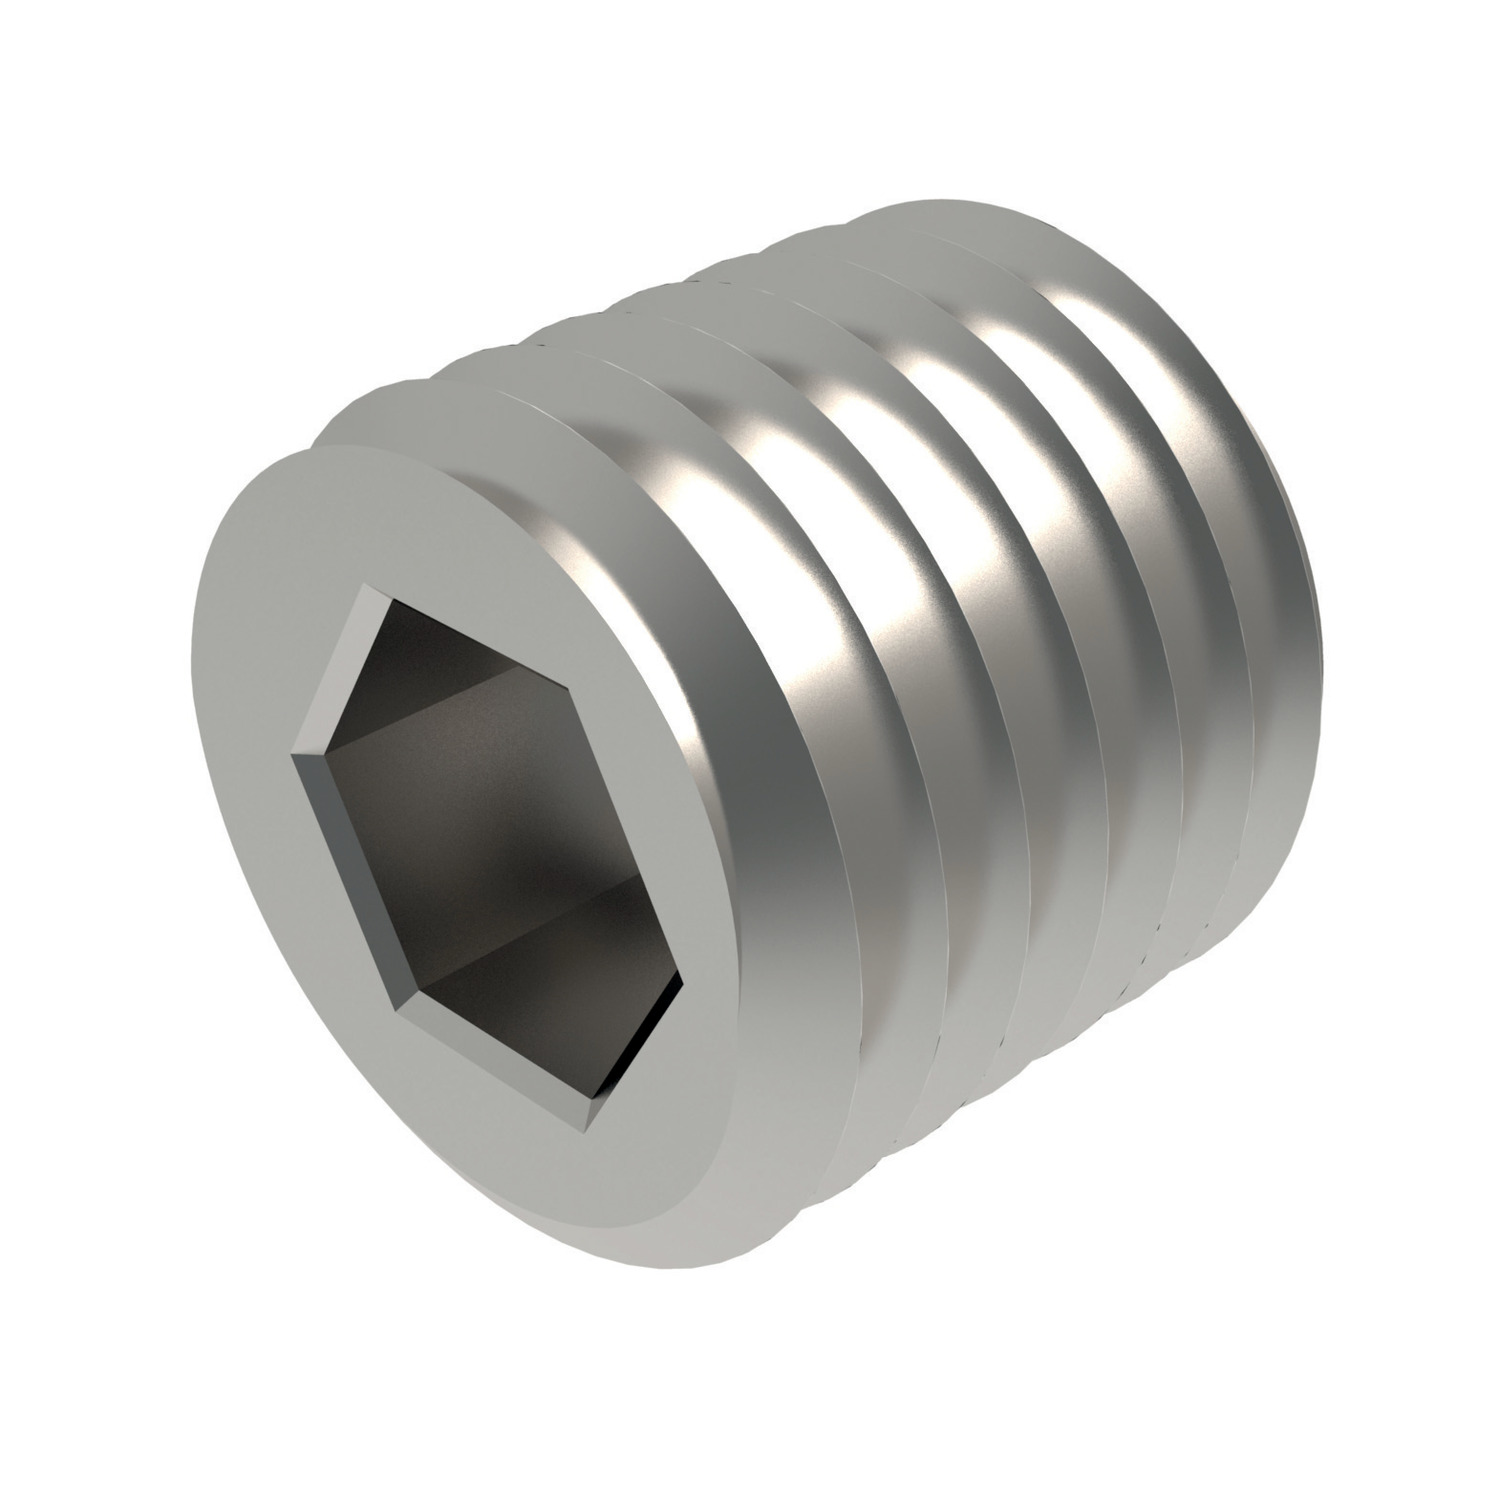 P0199.060-015-A2 Threaded Restrictor M6x1, 1.49 orifice A2 stainless steel. DANGER: Ensure this part is installed according to instructions in the product data sheet and installation notes. Holes must be completely free of oil, grease and debris.